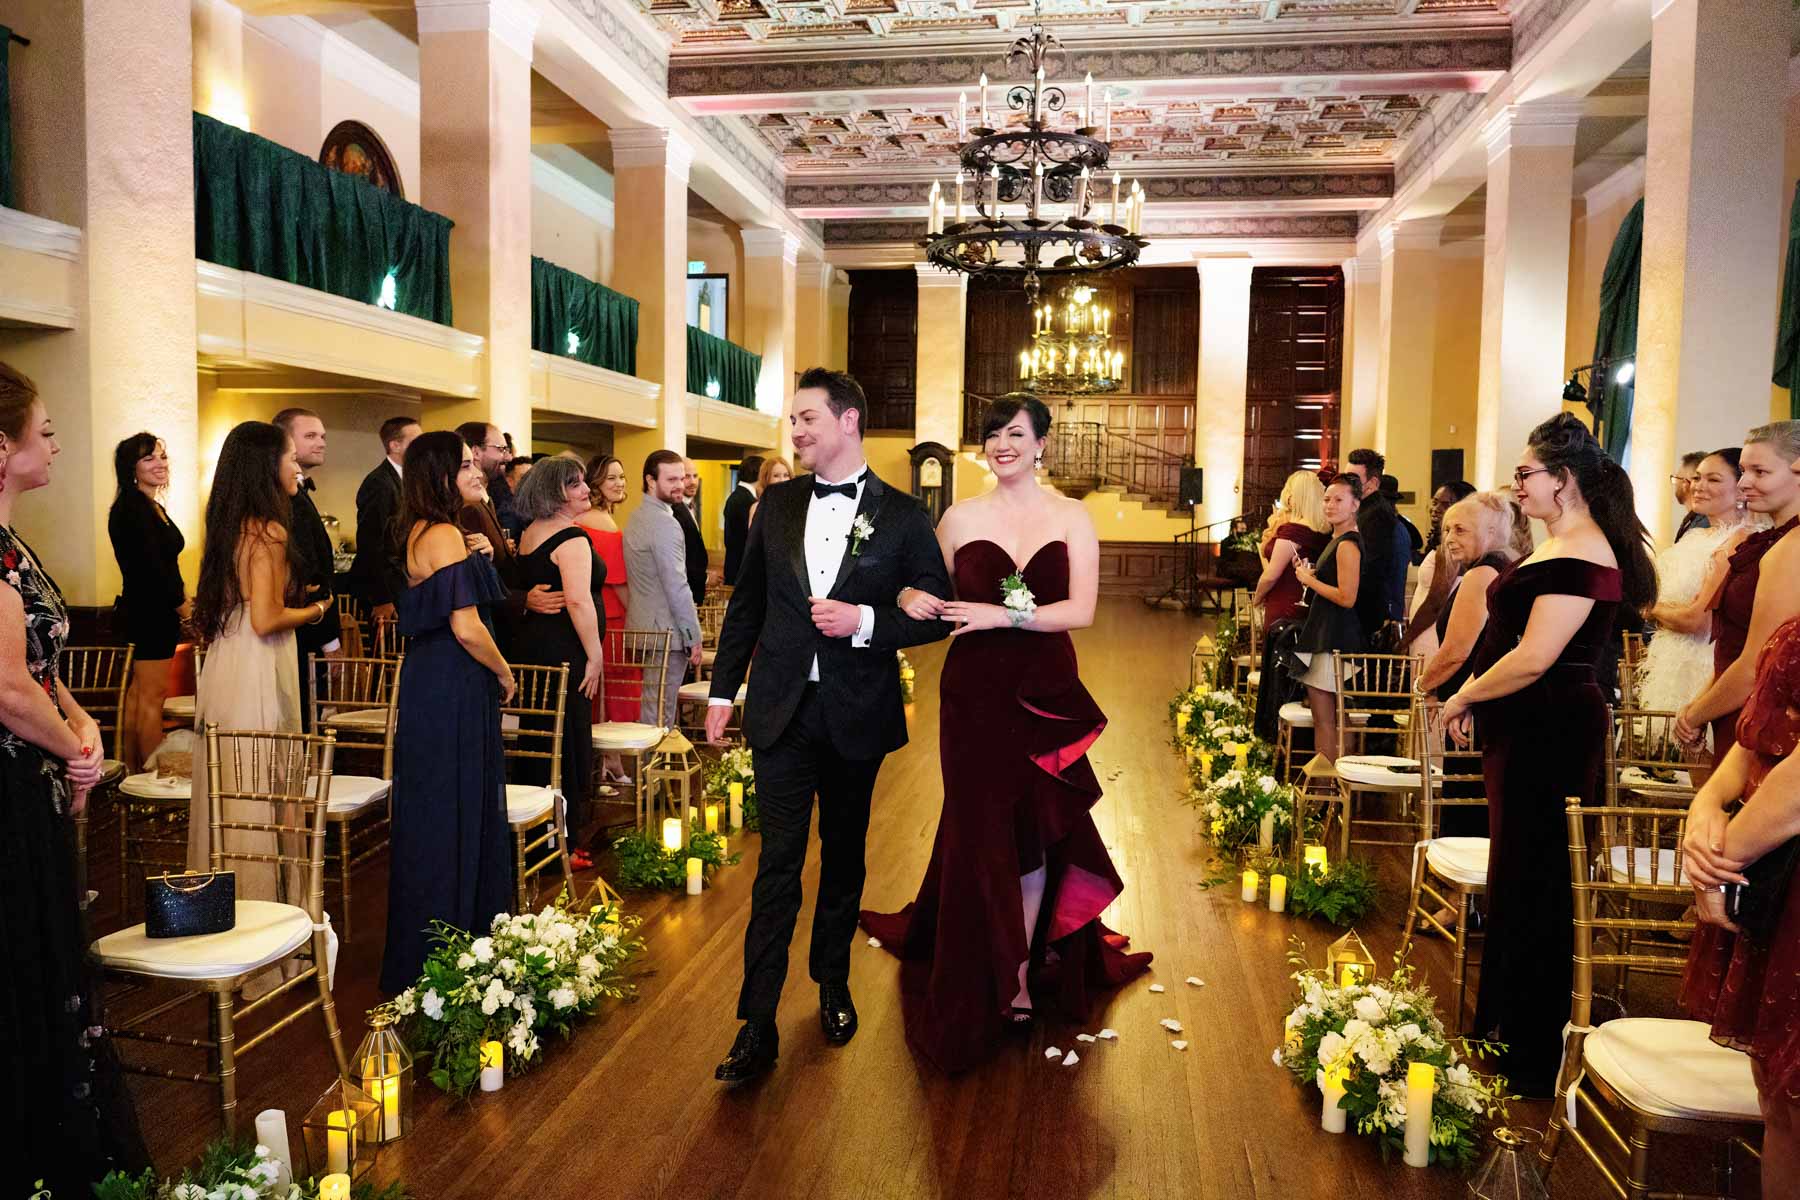 groom escorted up aisle with a woman in a strapless red dress while wedding guests watch